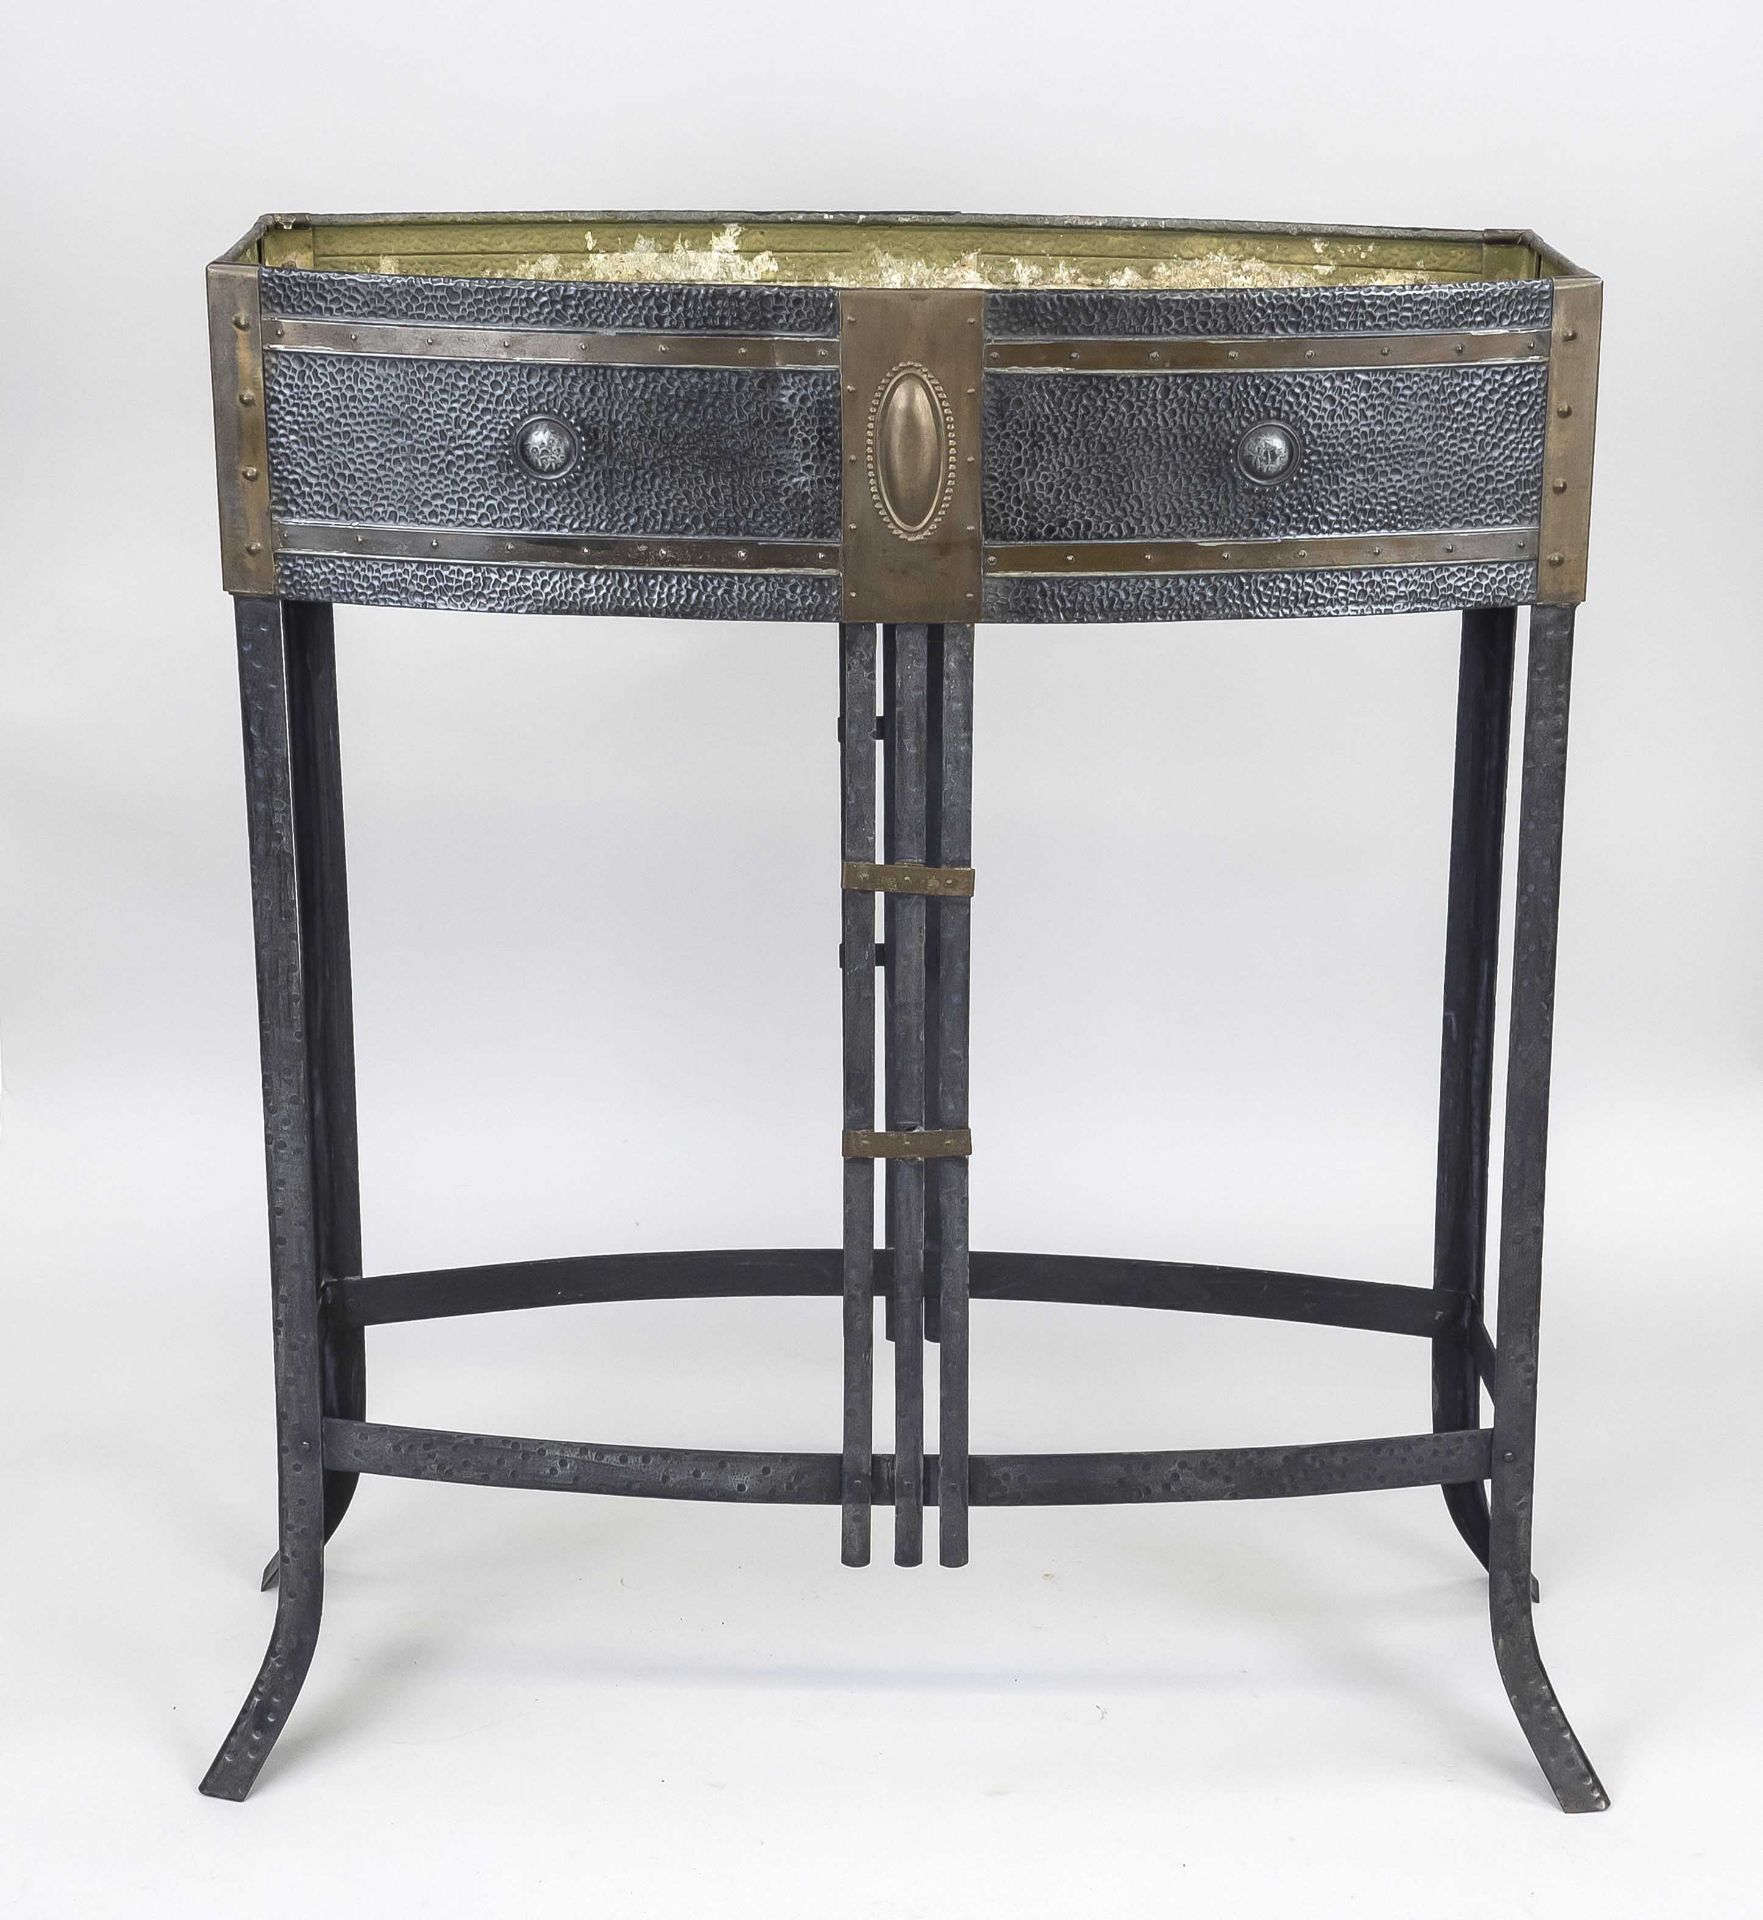 Art deco jardiniere, 1920s, marbled sheet iron with ornamented brass fittings on 4 legs with